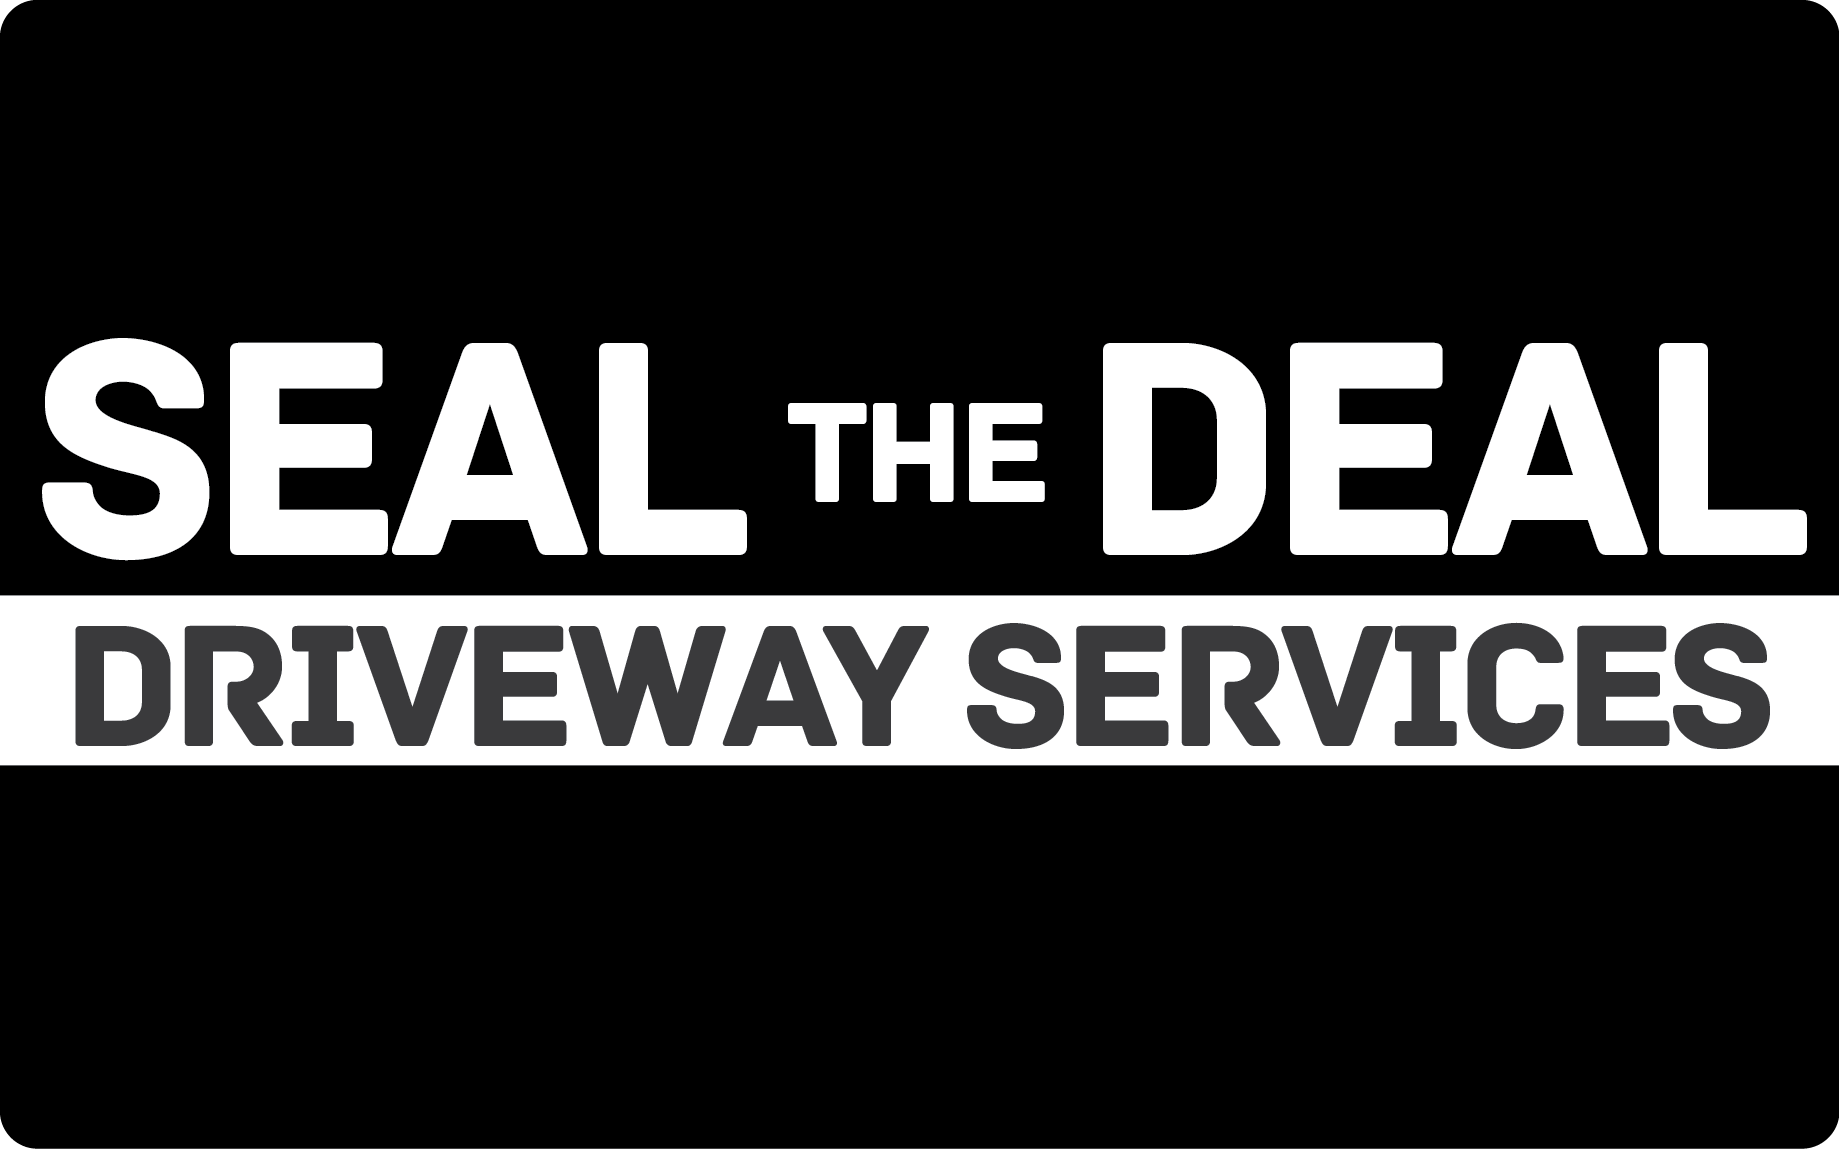 Seal The Deal Driveway Services's logo